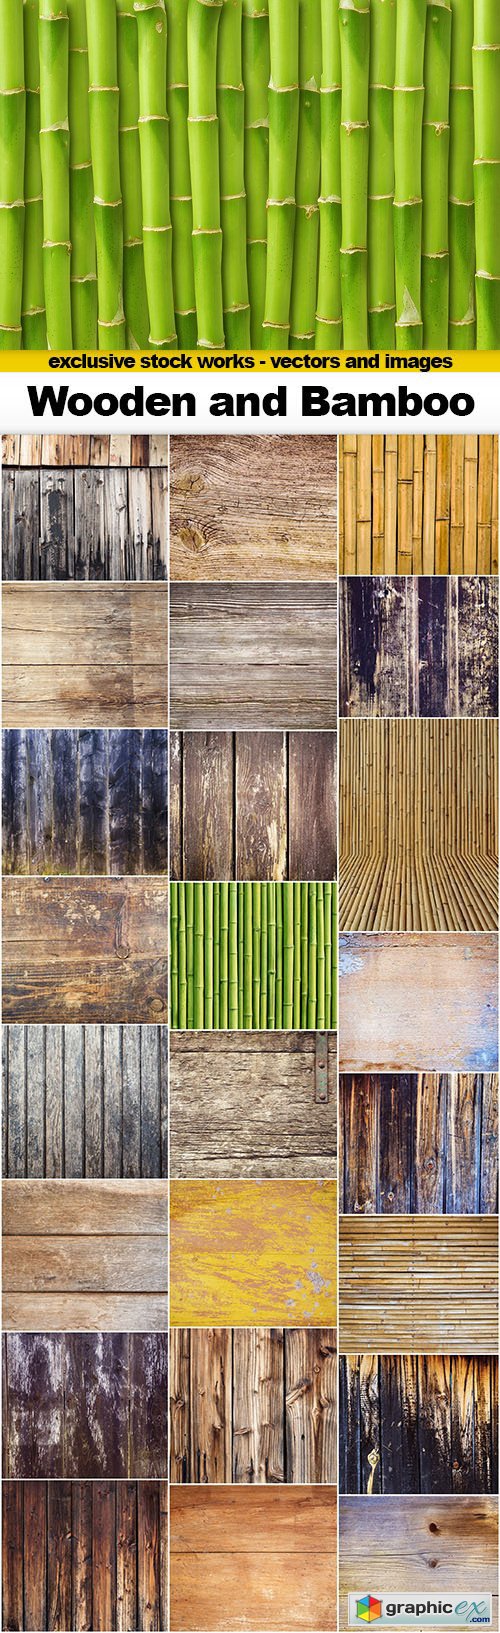 Wooden Boards and Bamboo With Texture - 25x JPEGs